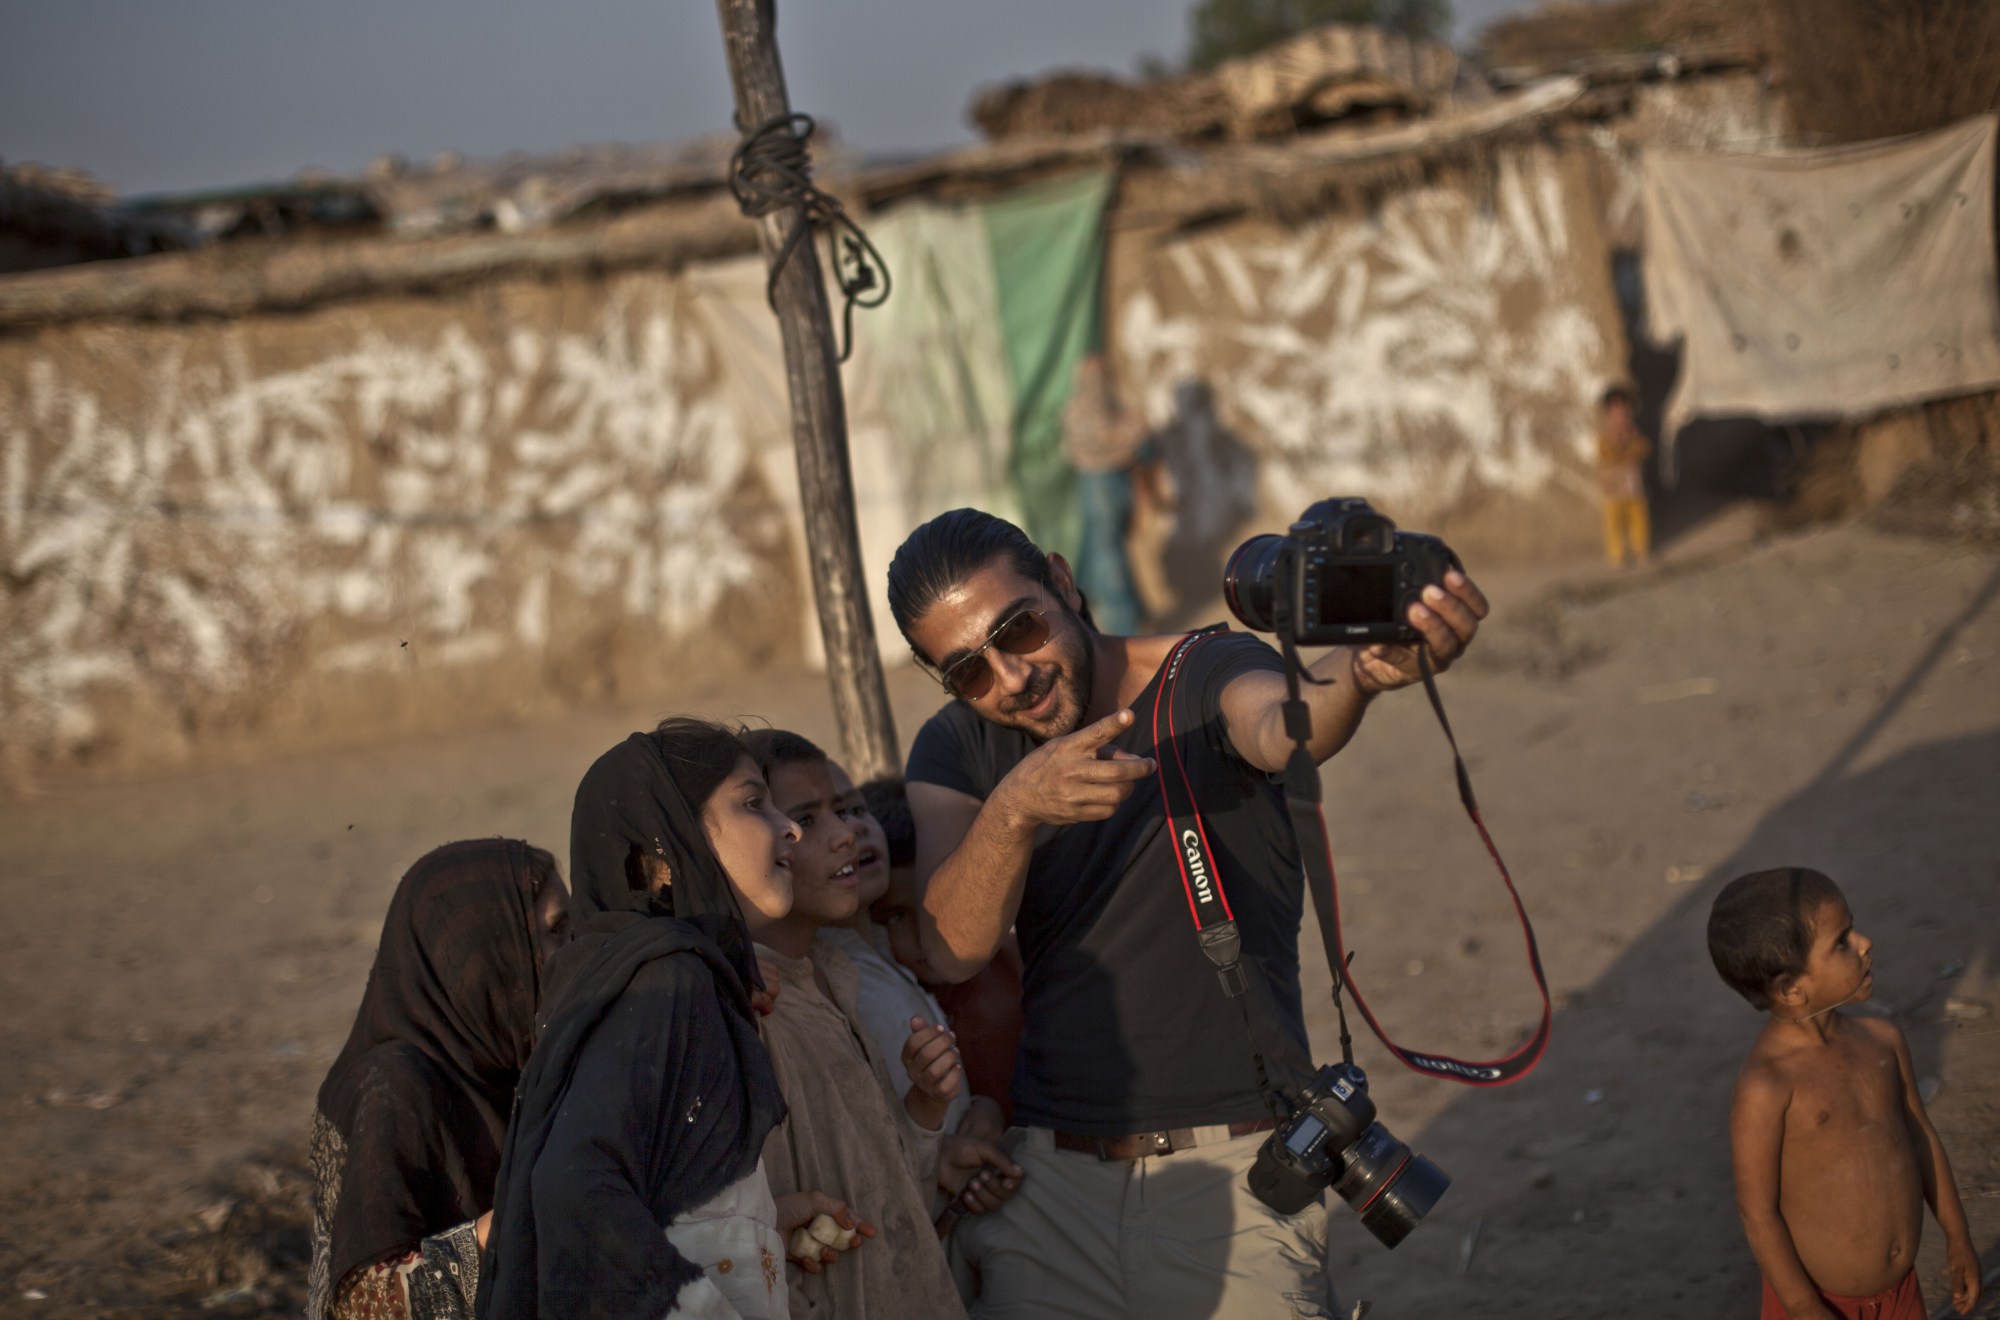  Pakistan's Chief Photographer Muhammed Muheisen shows Afghan refugee children how the camera works, in a poor neighborhood on the outskirts of Islamabad, Pakistan, Monday, Oct. 21, 2013. (AP Photo/Nathalie Bardou) 